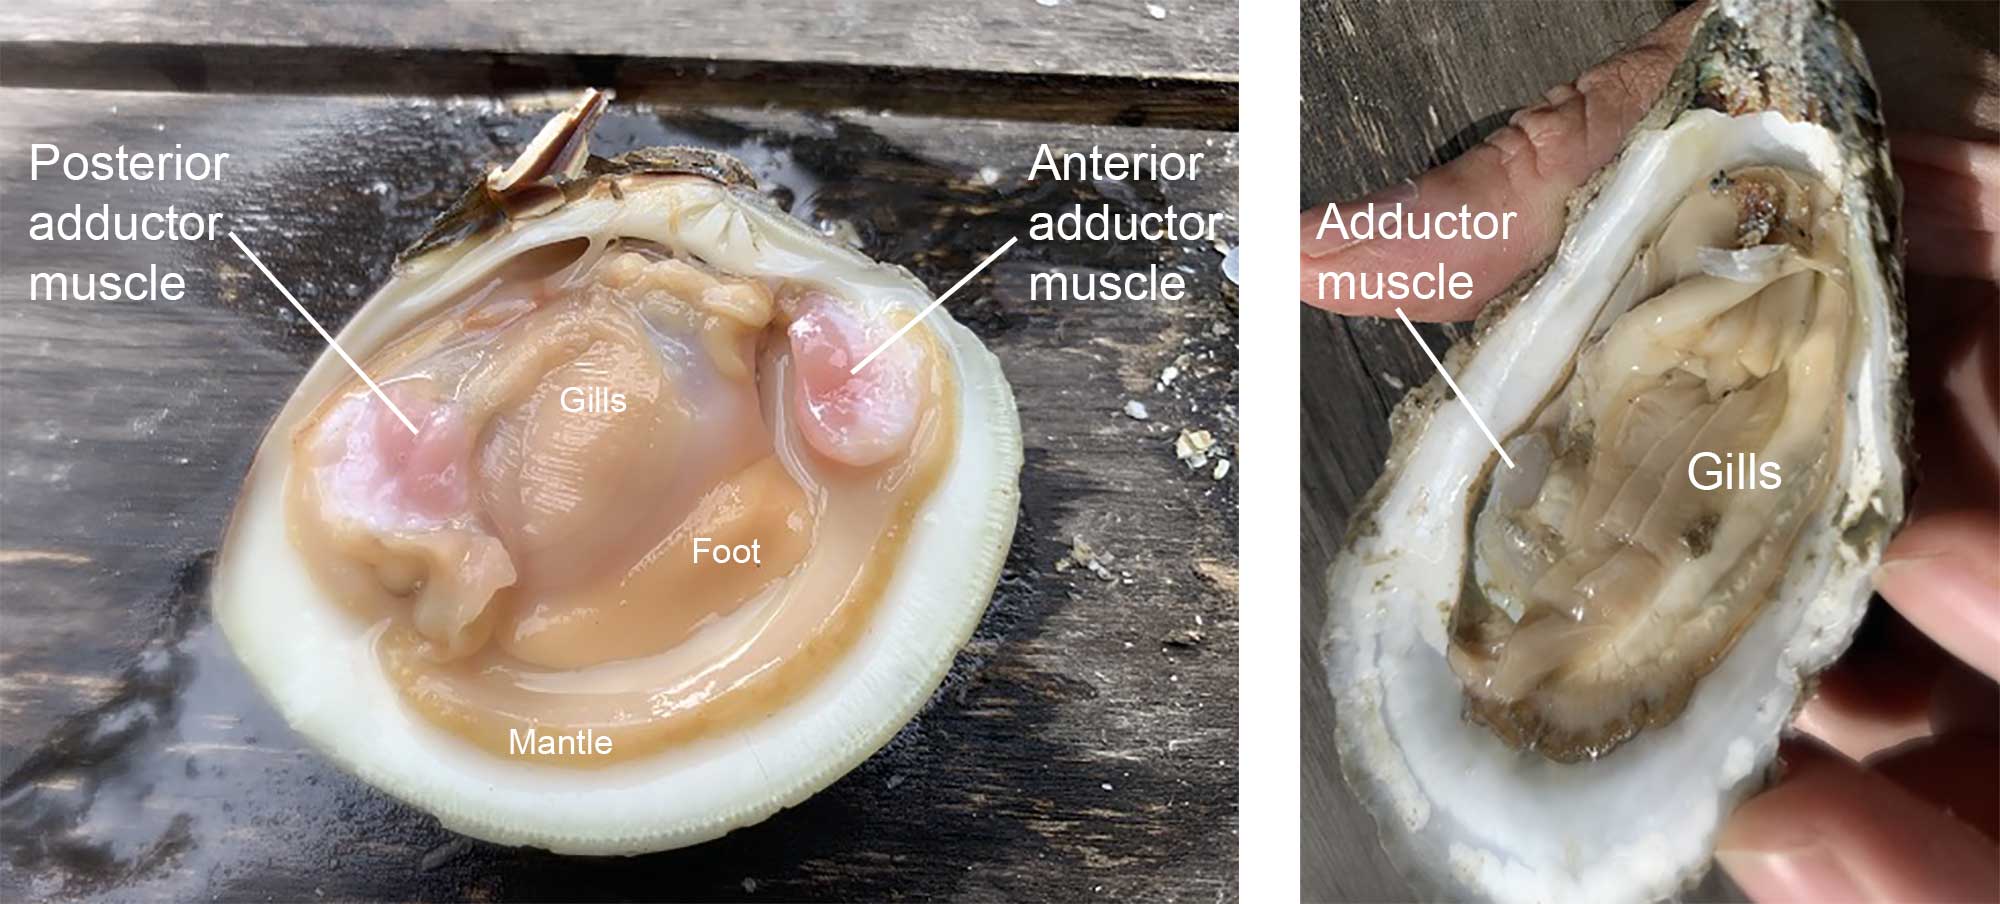 Two photographs of the internal anatomies of a clam and oyster, with different parts labeled.